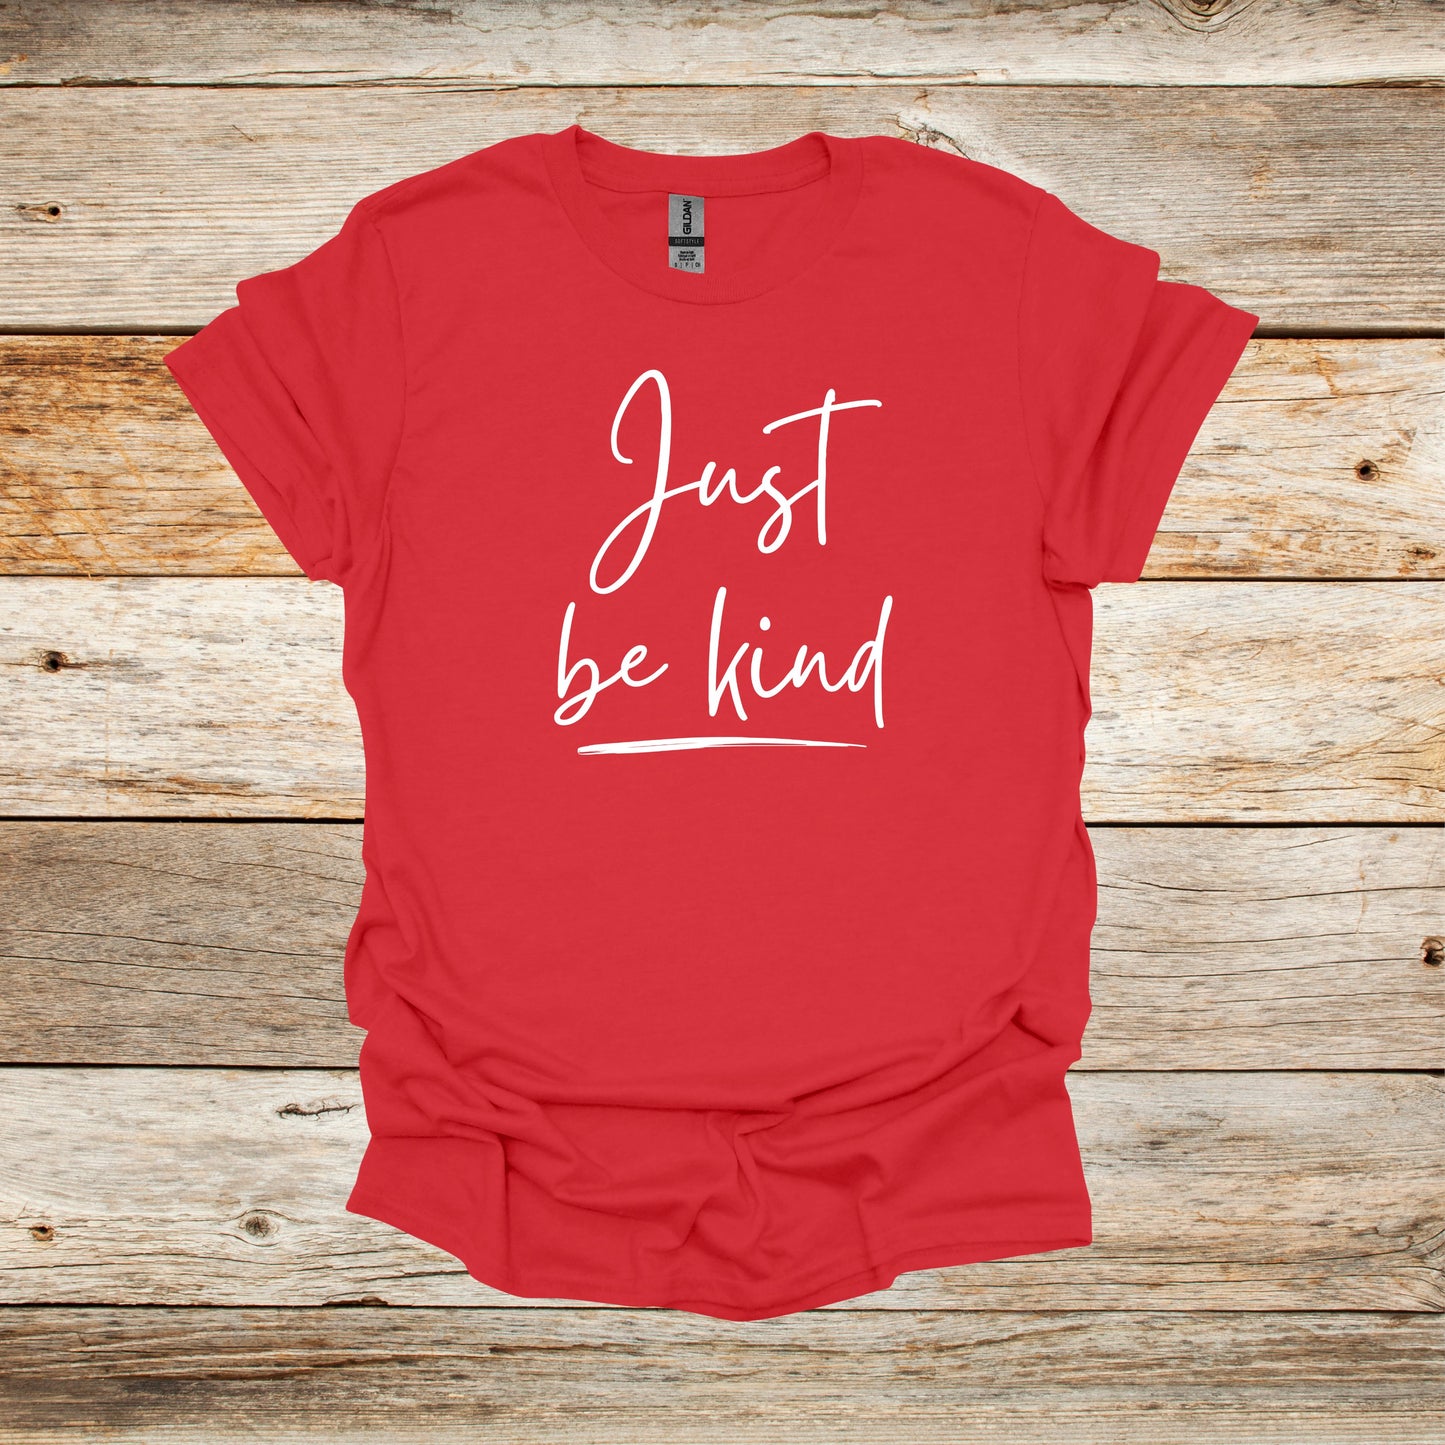 Sayings T-Shirt - Just Be Kind - Men's and Women's Tee Shirts - Sayings T-Shirts Graphic Avenue Red Adult Small 